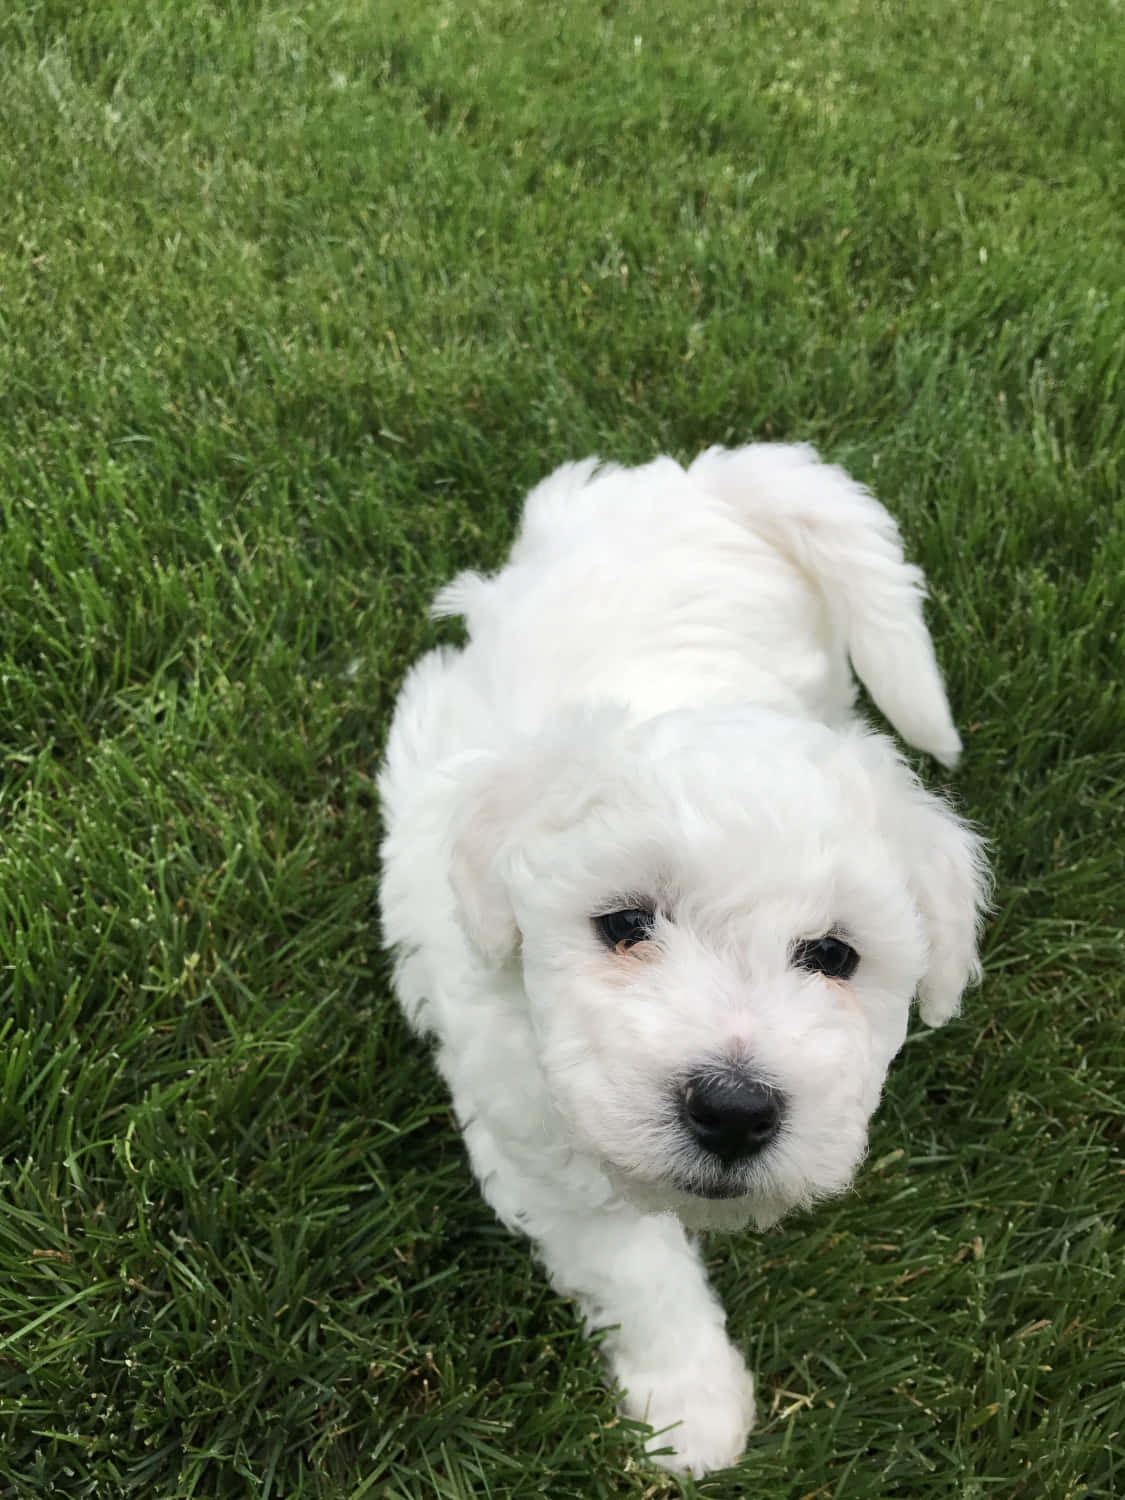 A White Puppy Standing In The Grass